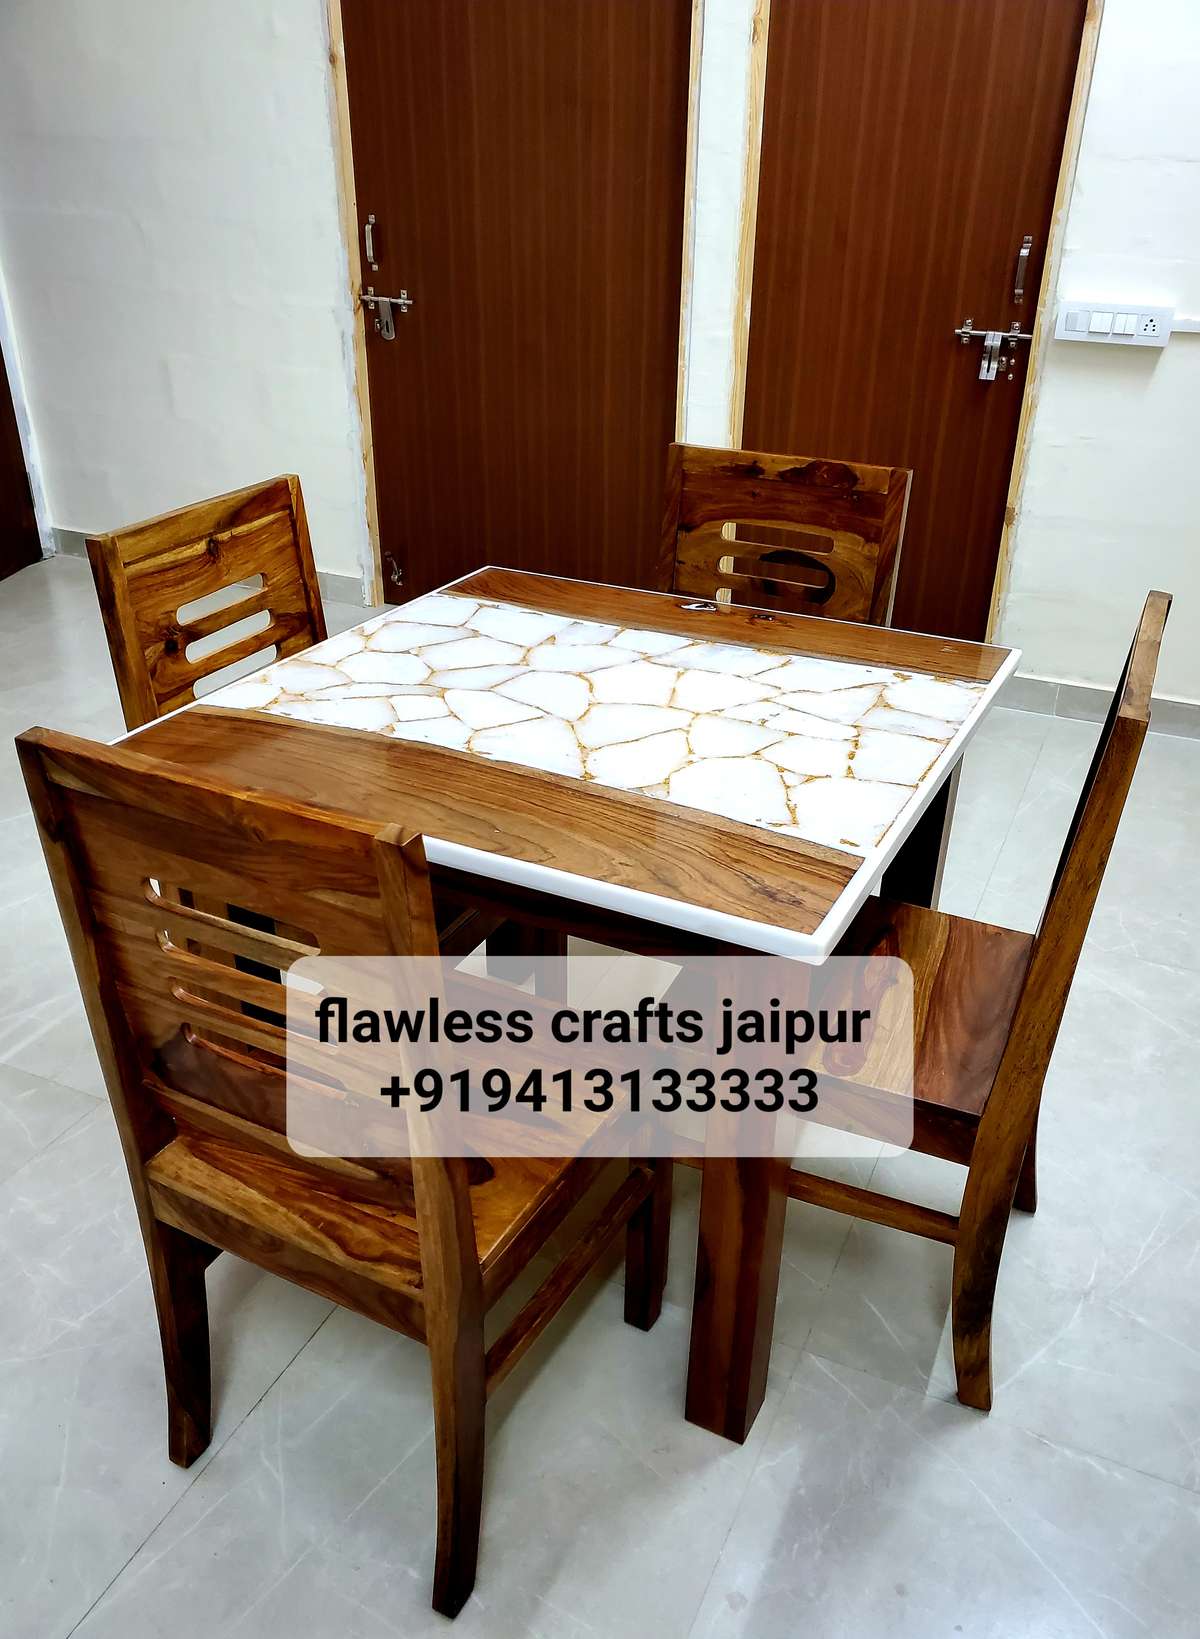 Designs by Building Supplies Flawless Crafts India Agate Slabs Factory, Jaipur | Kolo